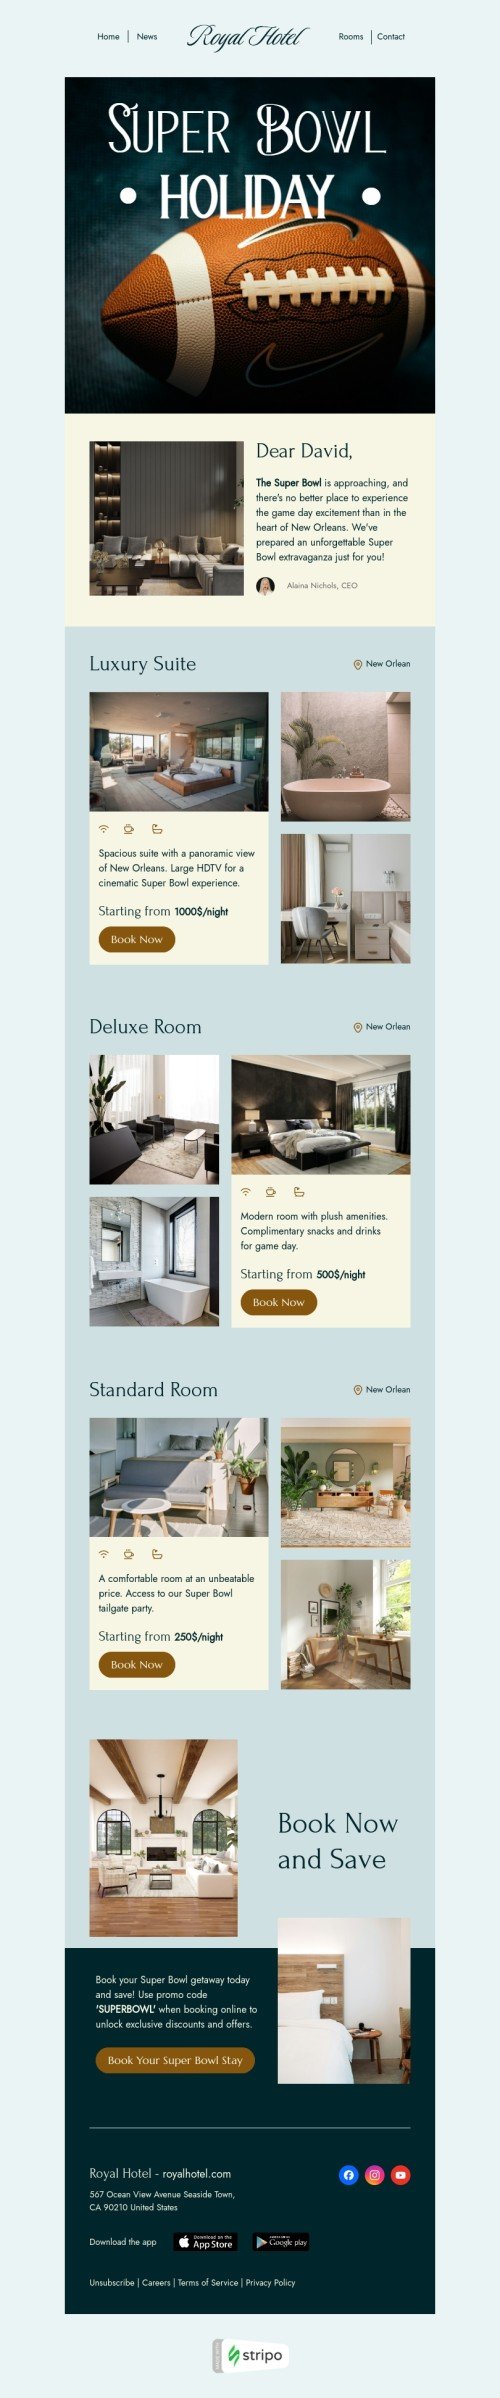 Super Bowl email template "Luxury suite" for hotels industry mobile view